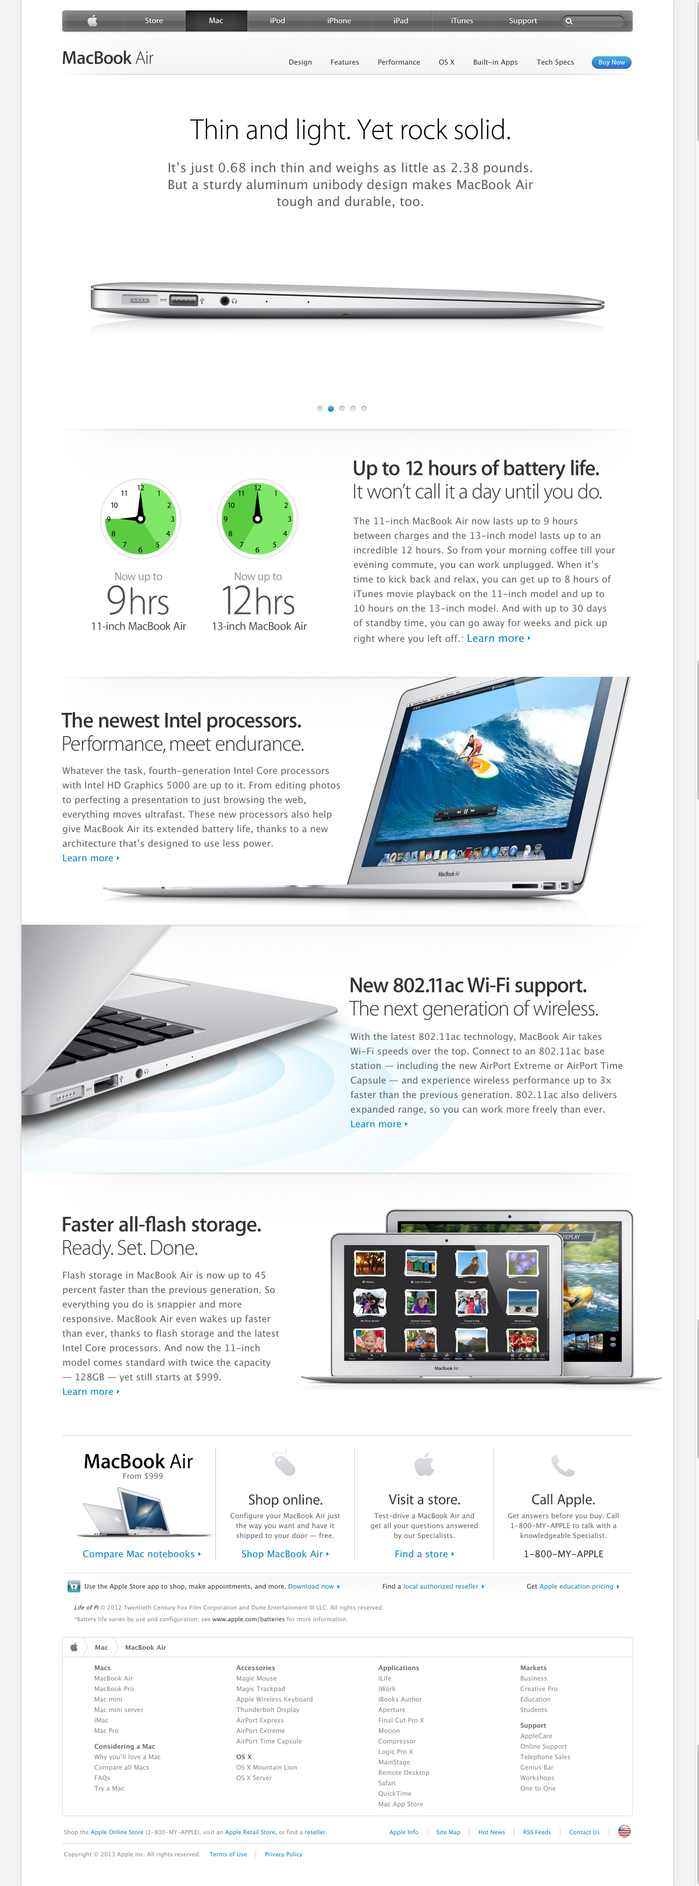 Apple sometimes uses an ultra thin weight of Myriad that is lighter than anything commercially available. I suppose they had one custom made to emphasize the &ldquo;weightlessness&rdquo; of the MacBook Air. This style of Myriad is also used elsewhere on Apple.com.